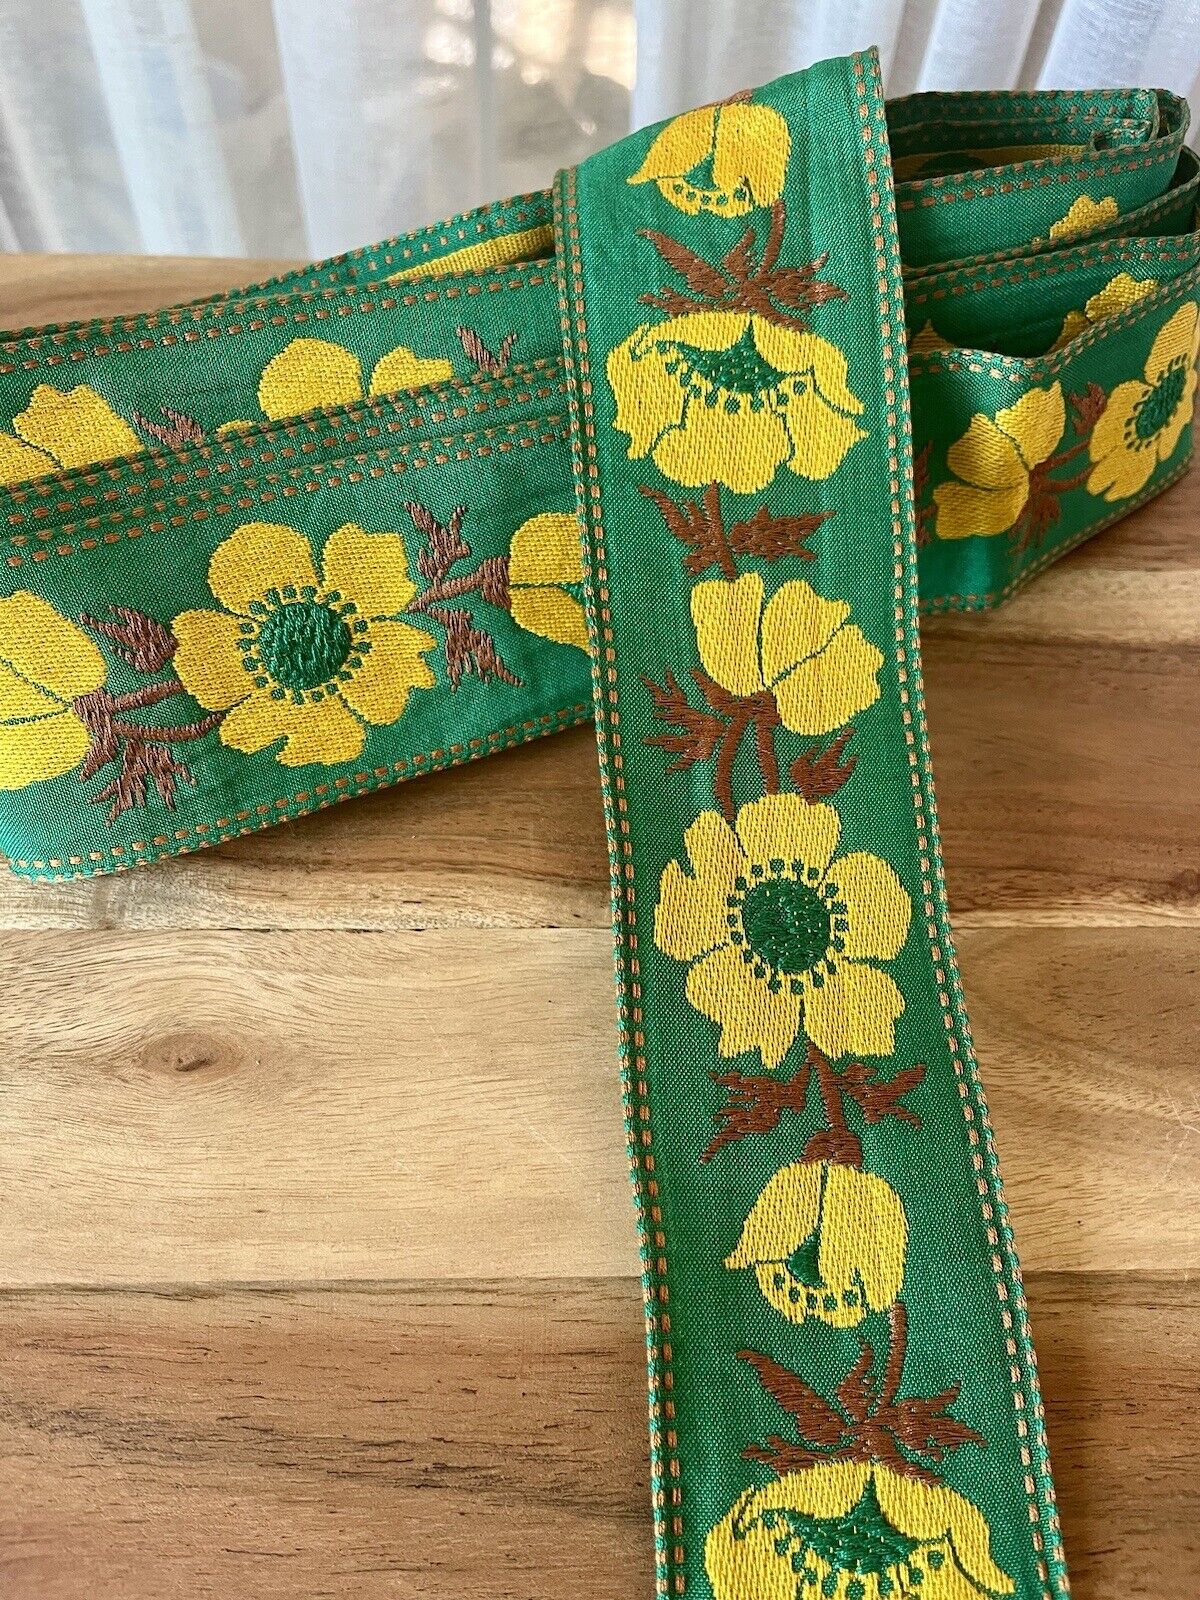 Darling Vintage 70s Cotton Embroidered Fabric Trim - Green With Yellow Flowers